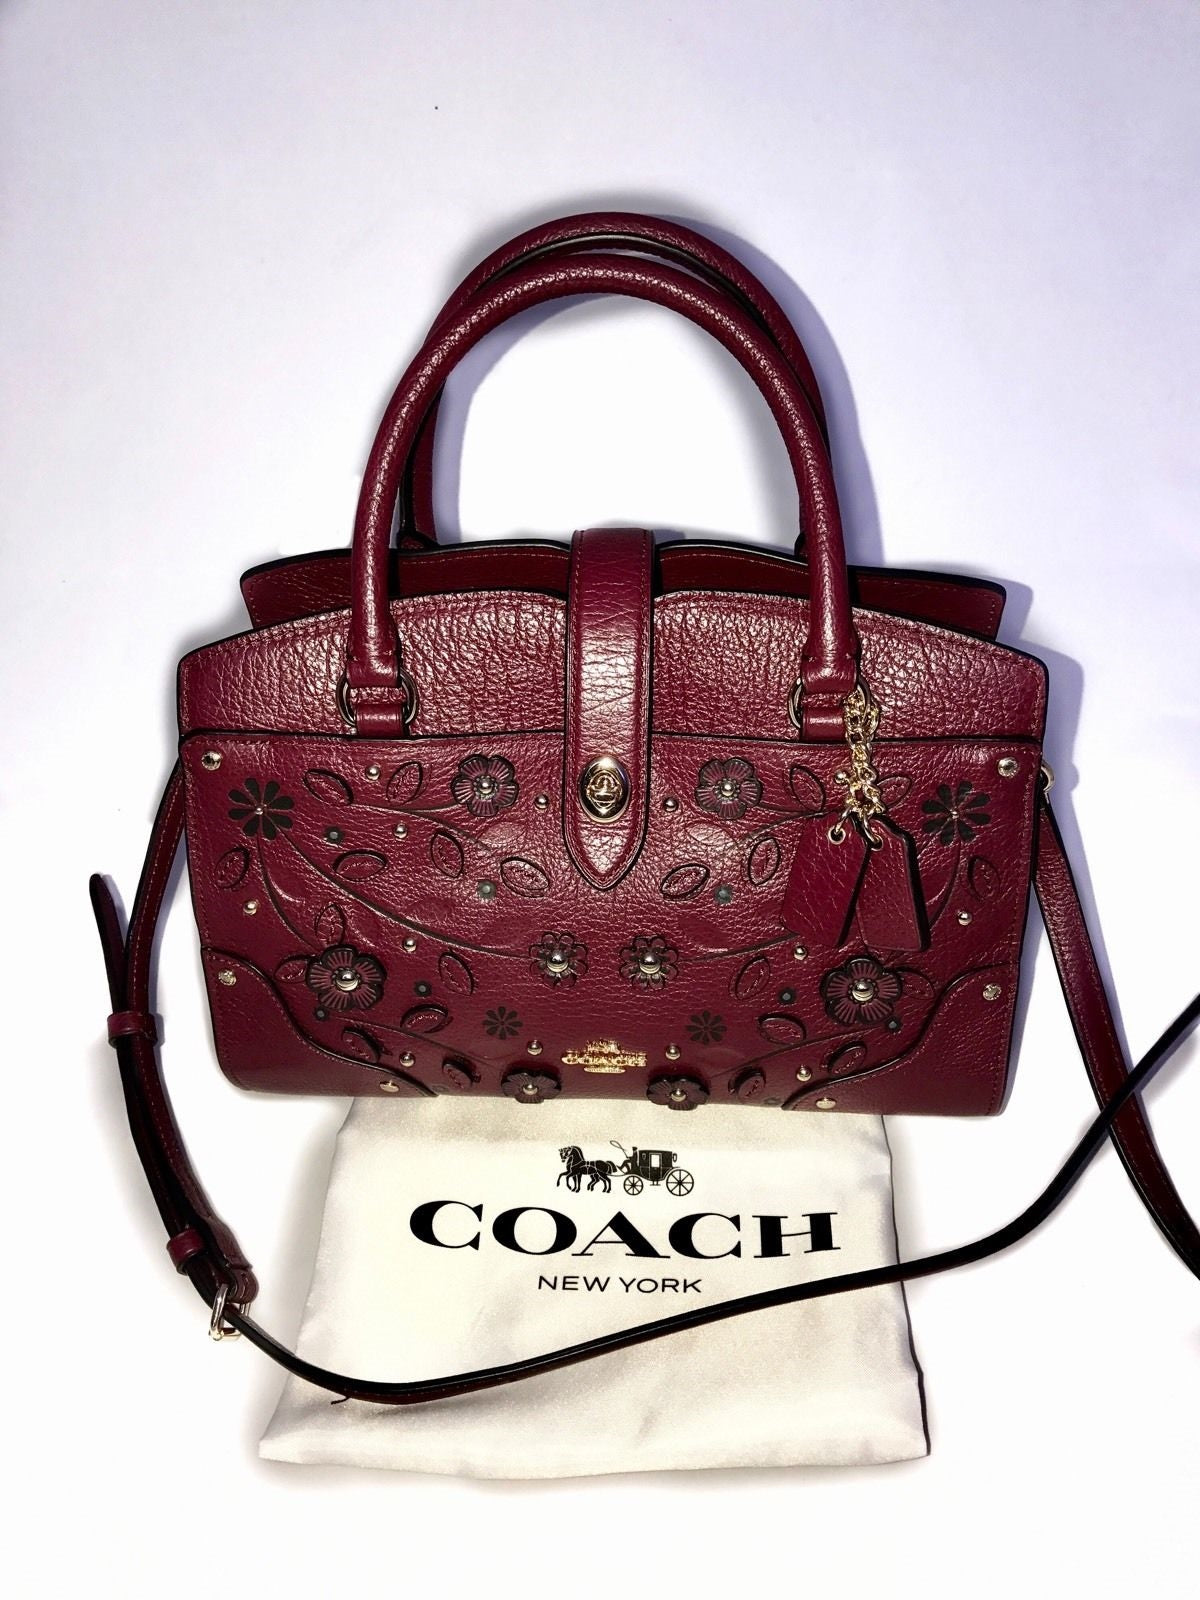 COACH Willow Floral Mercer Satchel 24 Rivets Leather Burgundy Bag NWT $398